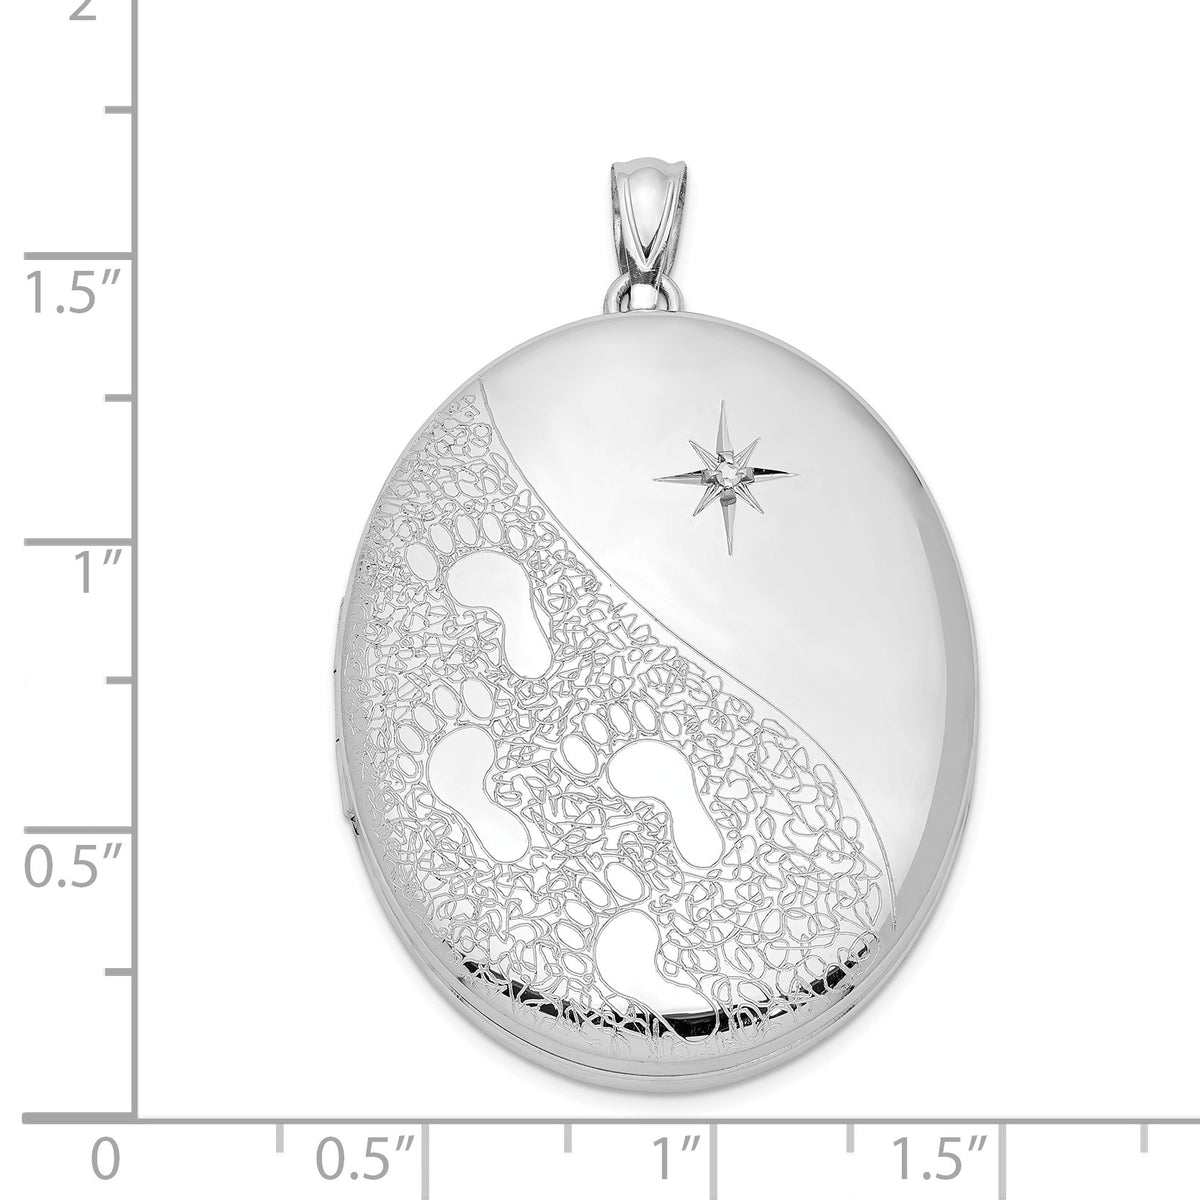 Alternate view of the 34mm Footprints and Diamond Star Oval Locket in Sterling Silver by The Black Bow Jewelry Co.